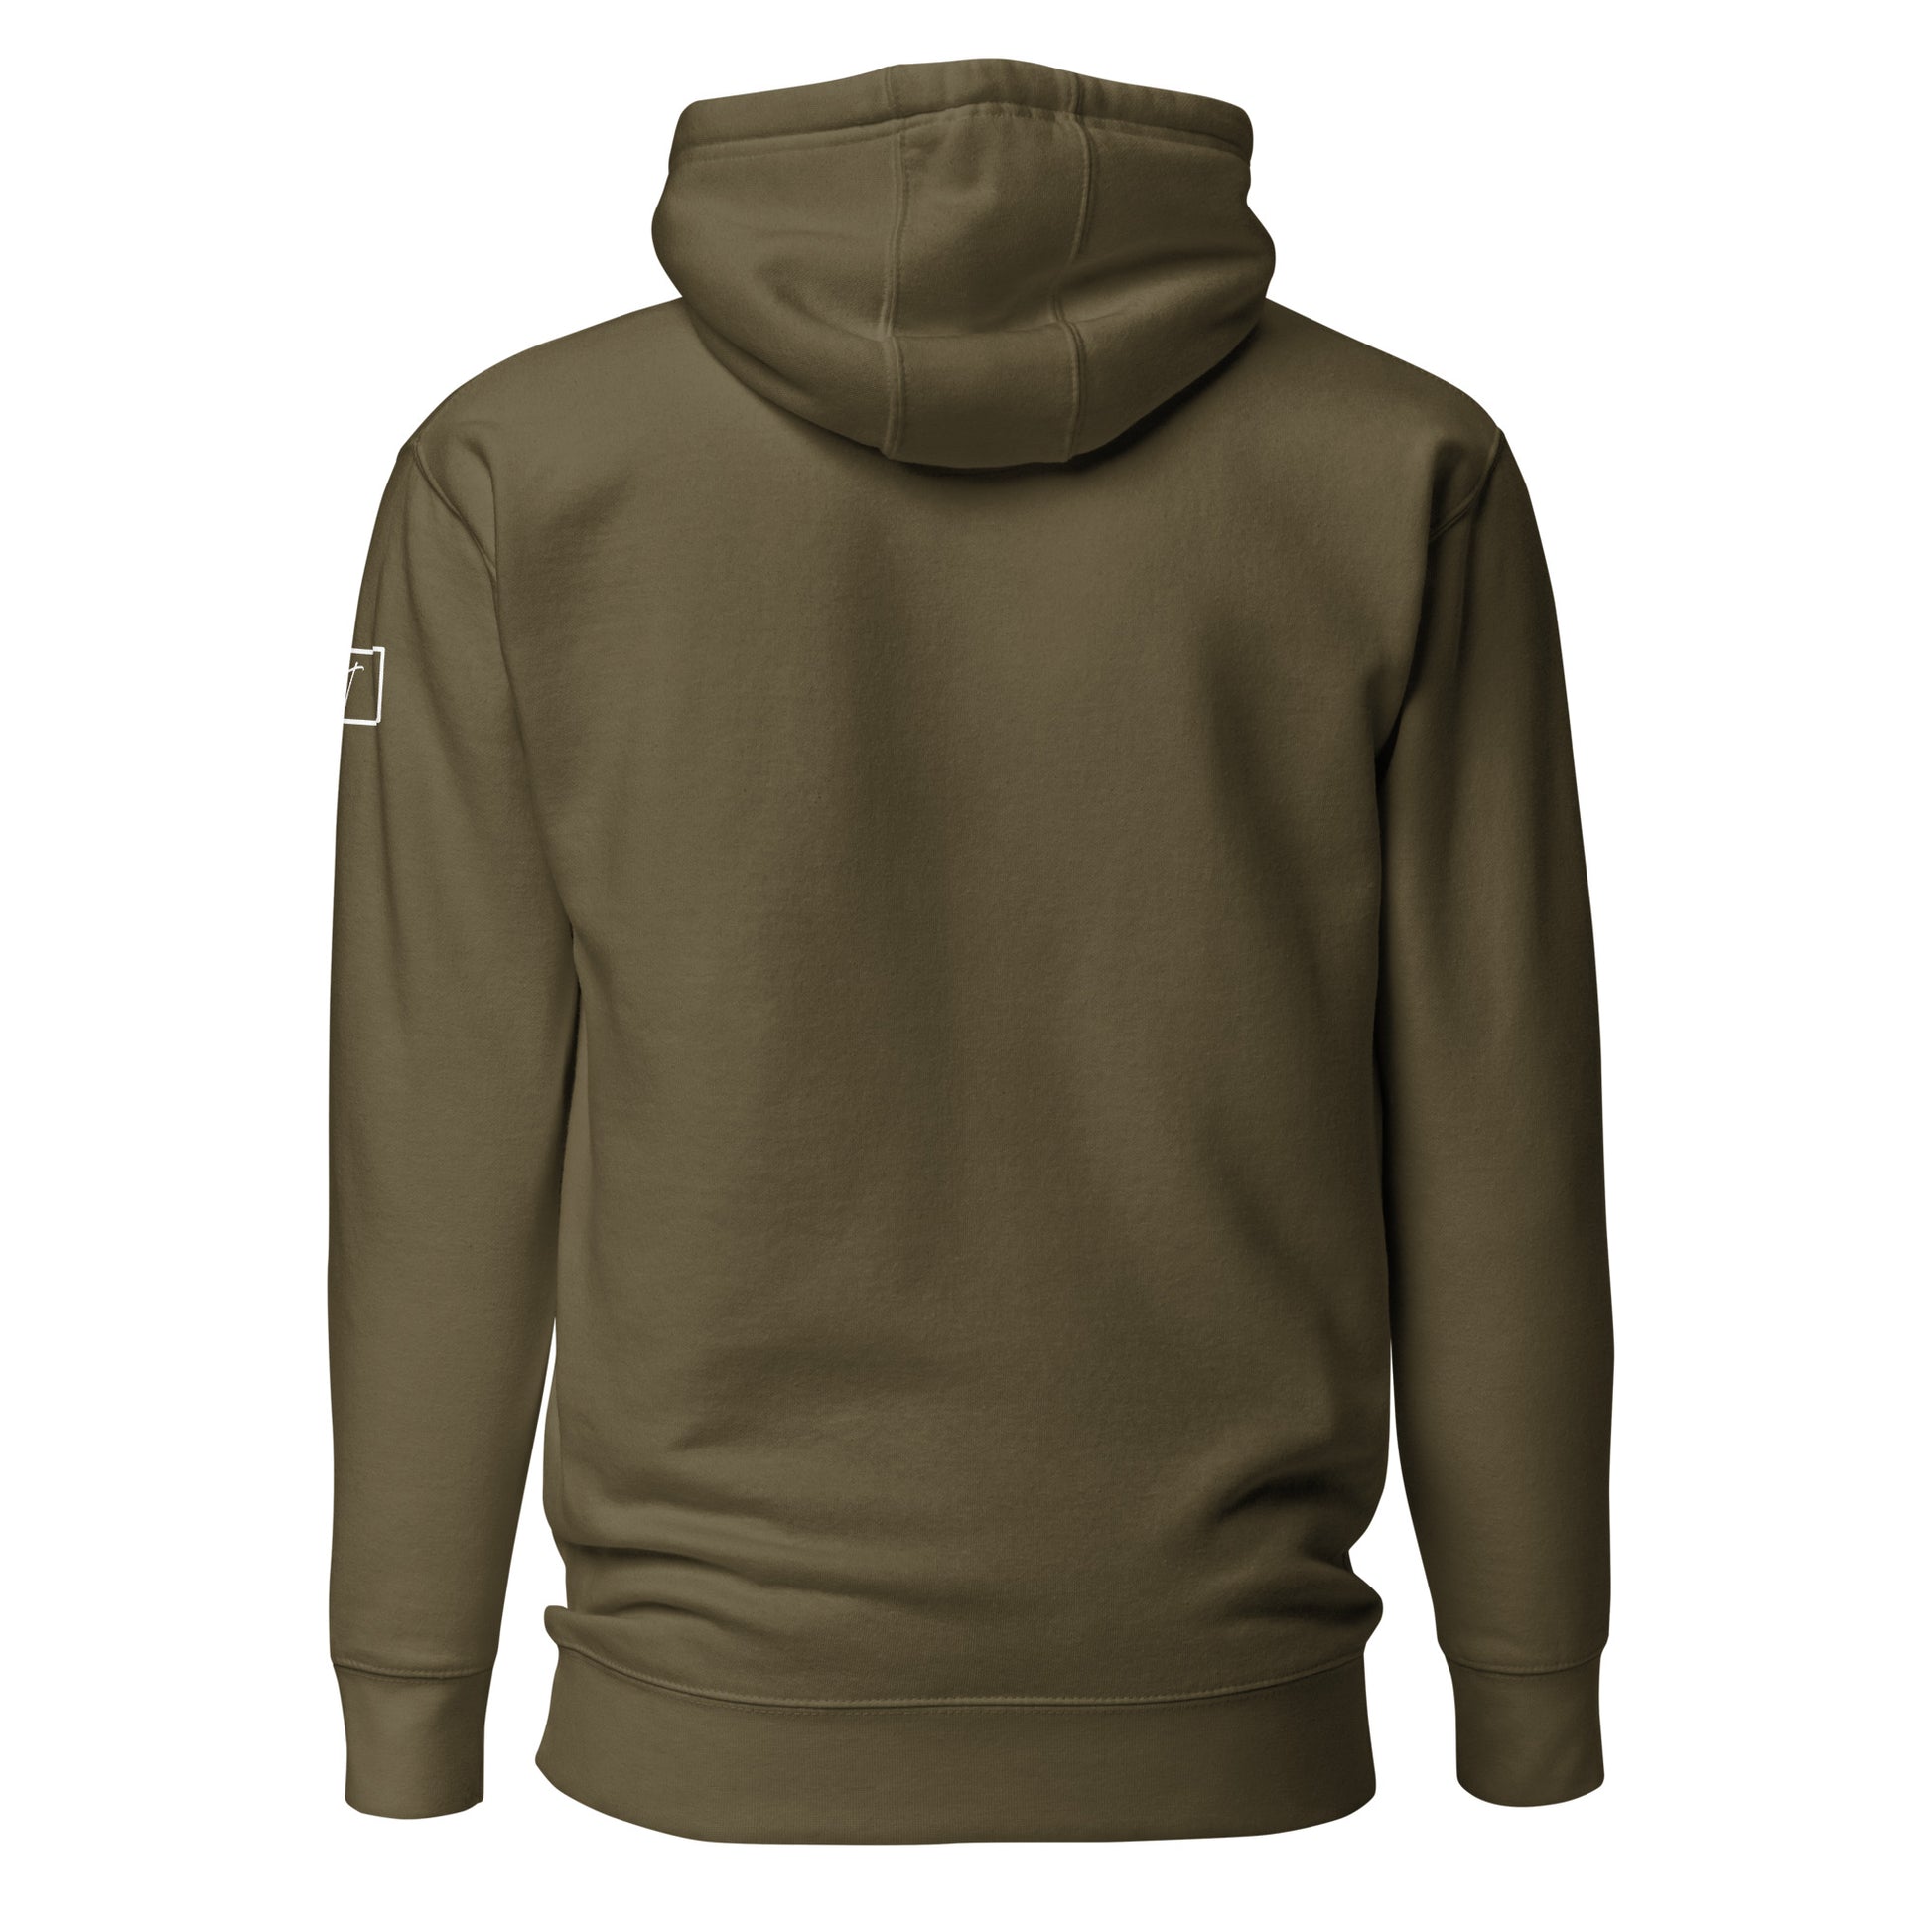 Back view of Storm Castle Peak in Custer Gallatin National Forest Montana Military Green Sweatshirt from Park Attire